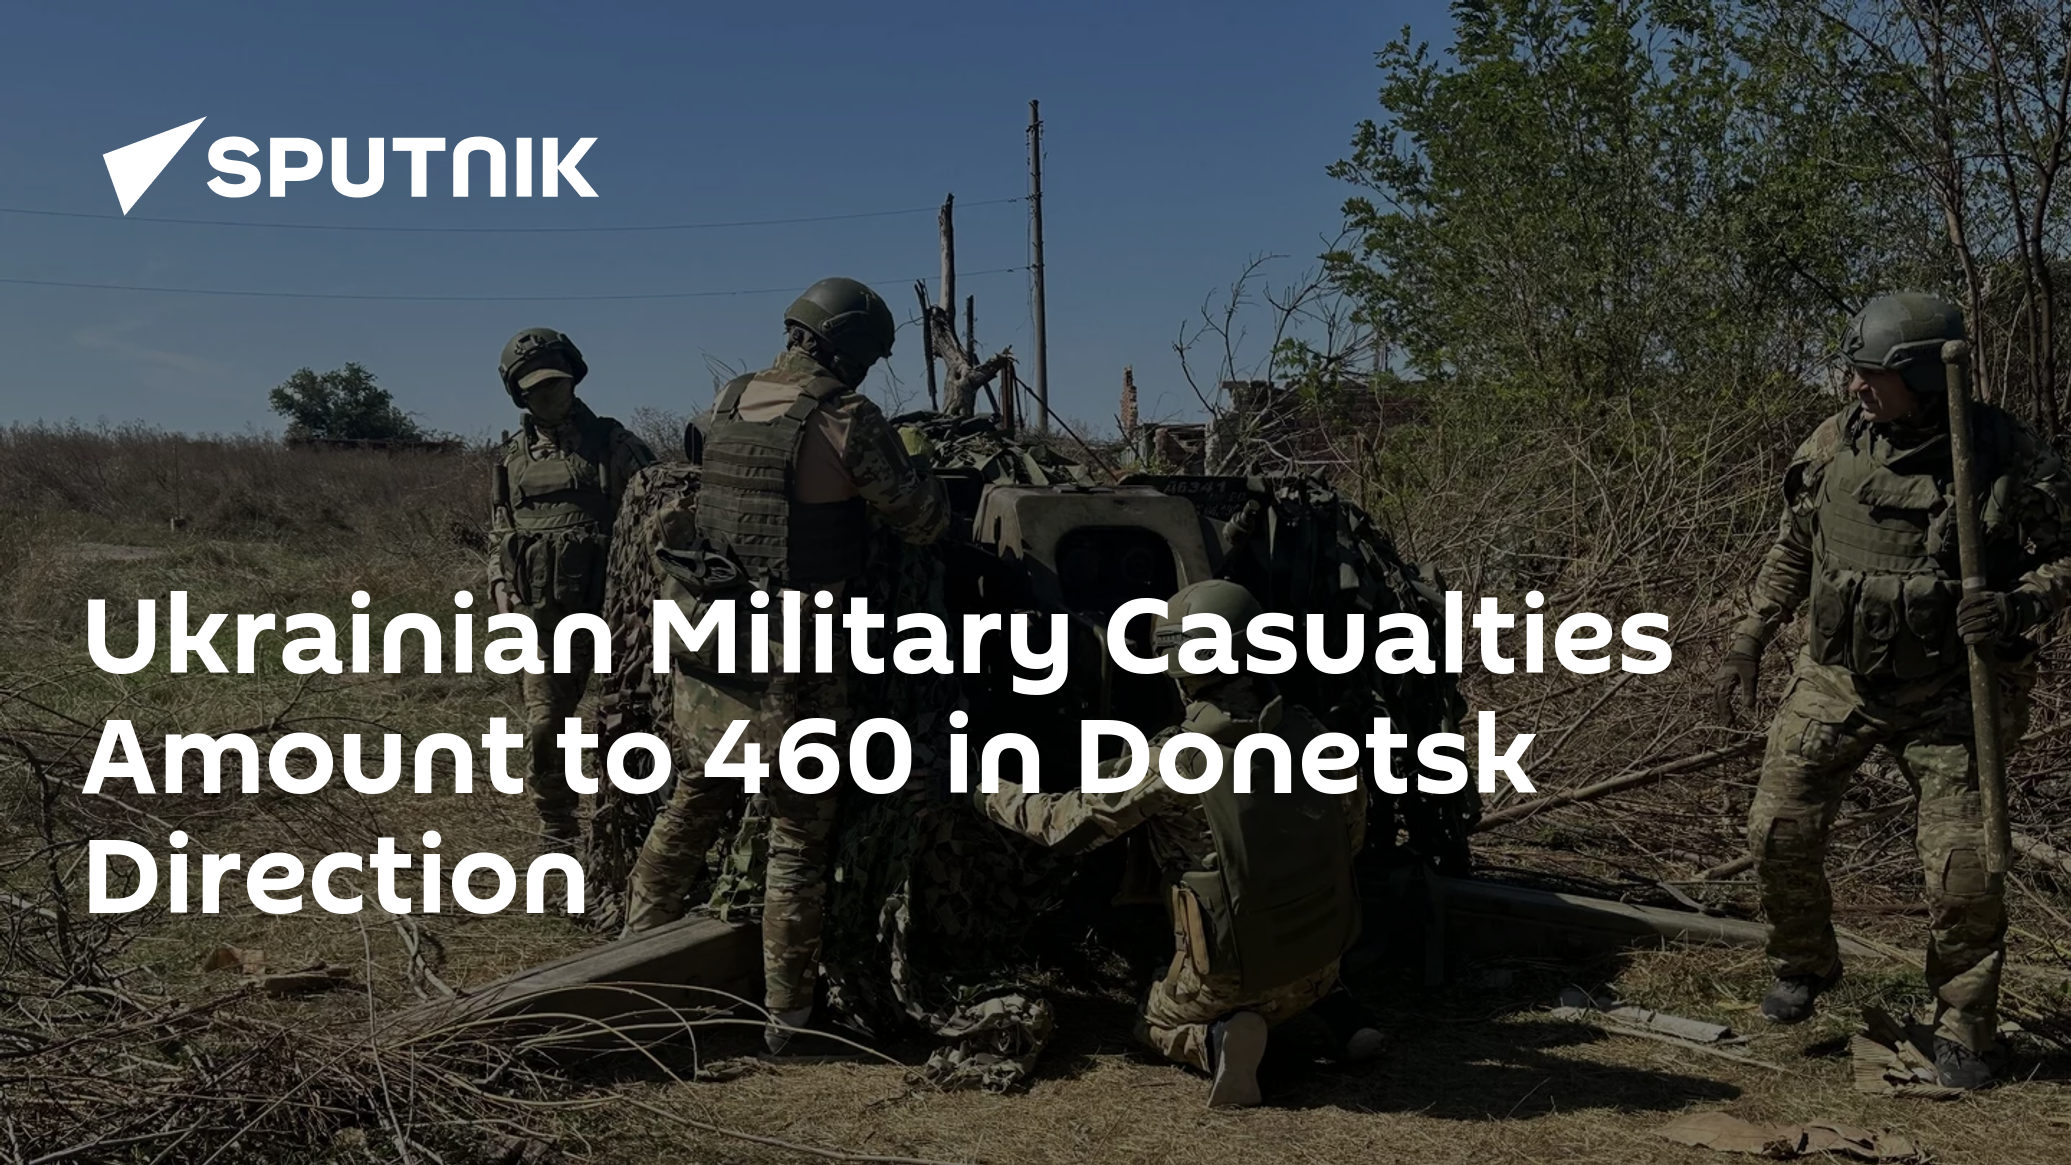 Ukrainian Military Casualties Amount to 460 in Donetsk Direction